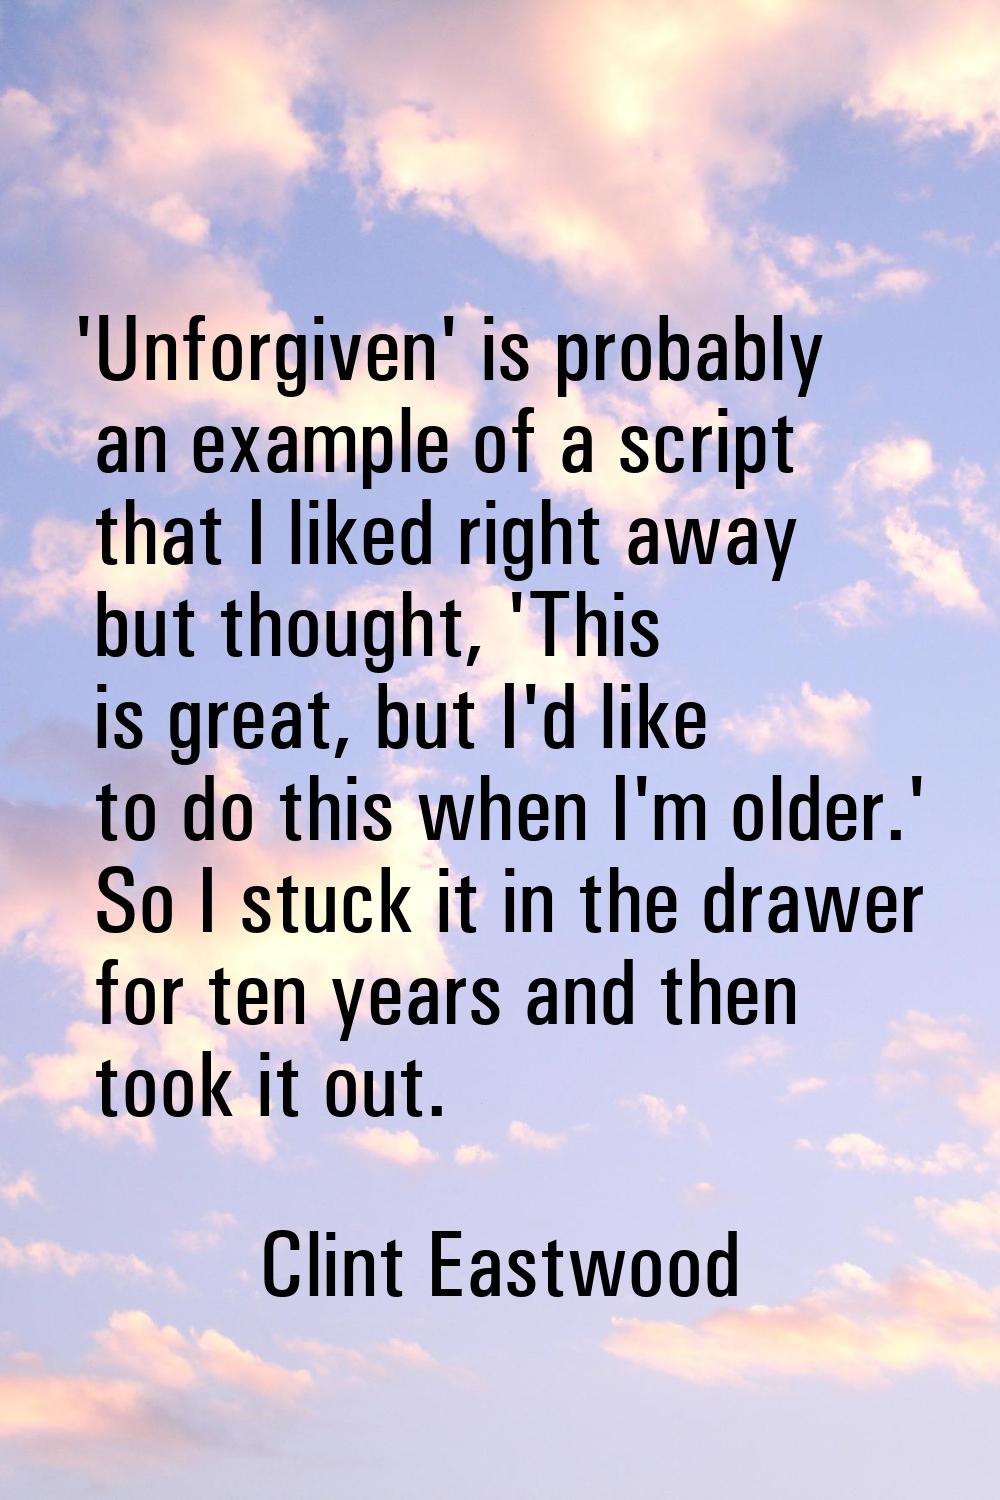 'Unforgiven' is probably an example of a script that I liked right away but thought, 'This is great